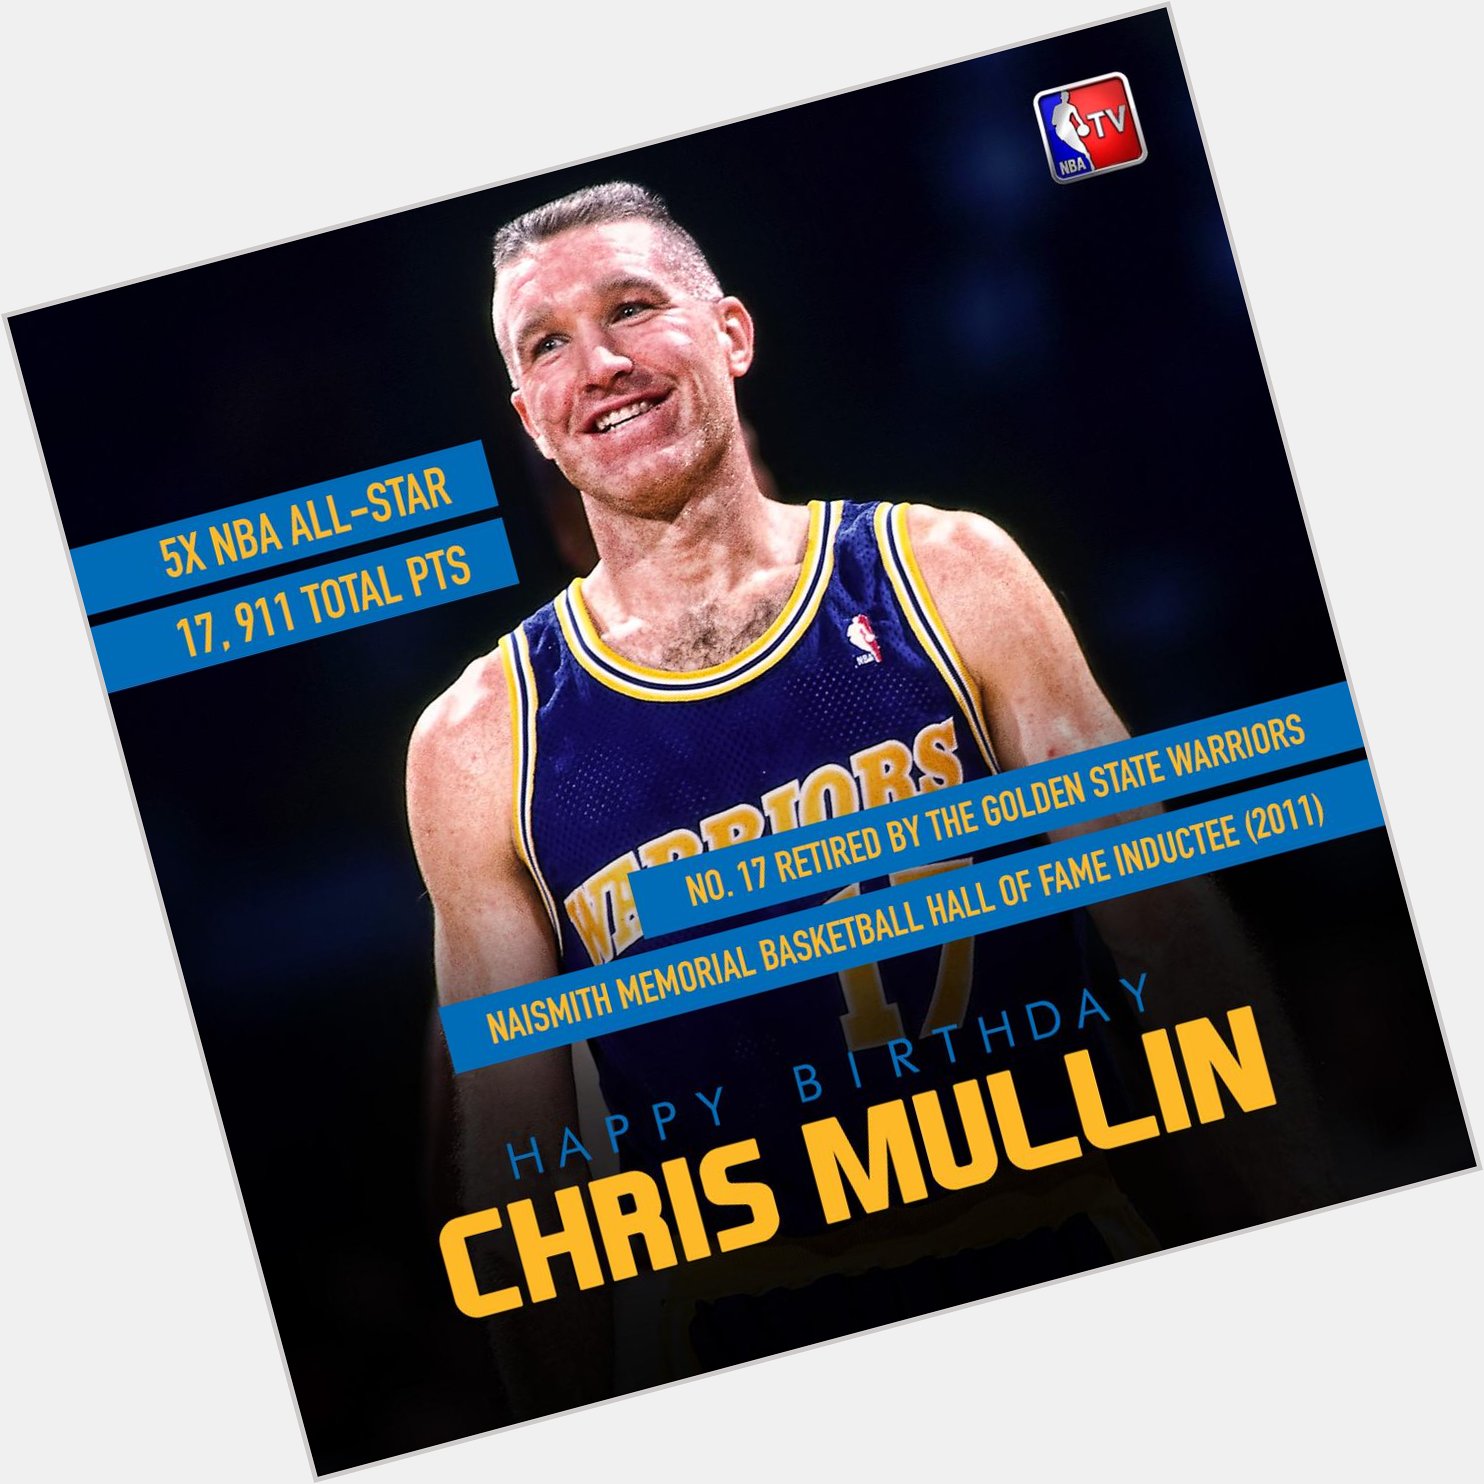 Join us in wishing Chris Mullin a Happy Birthday! The legend turns 52 today. 